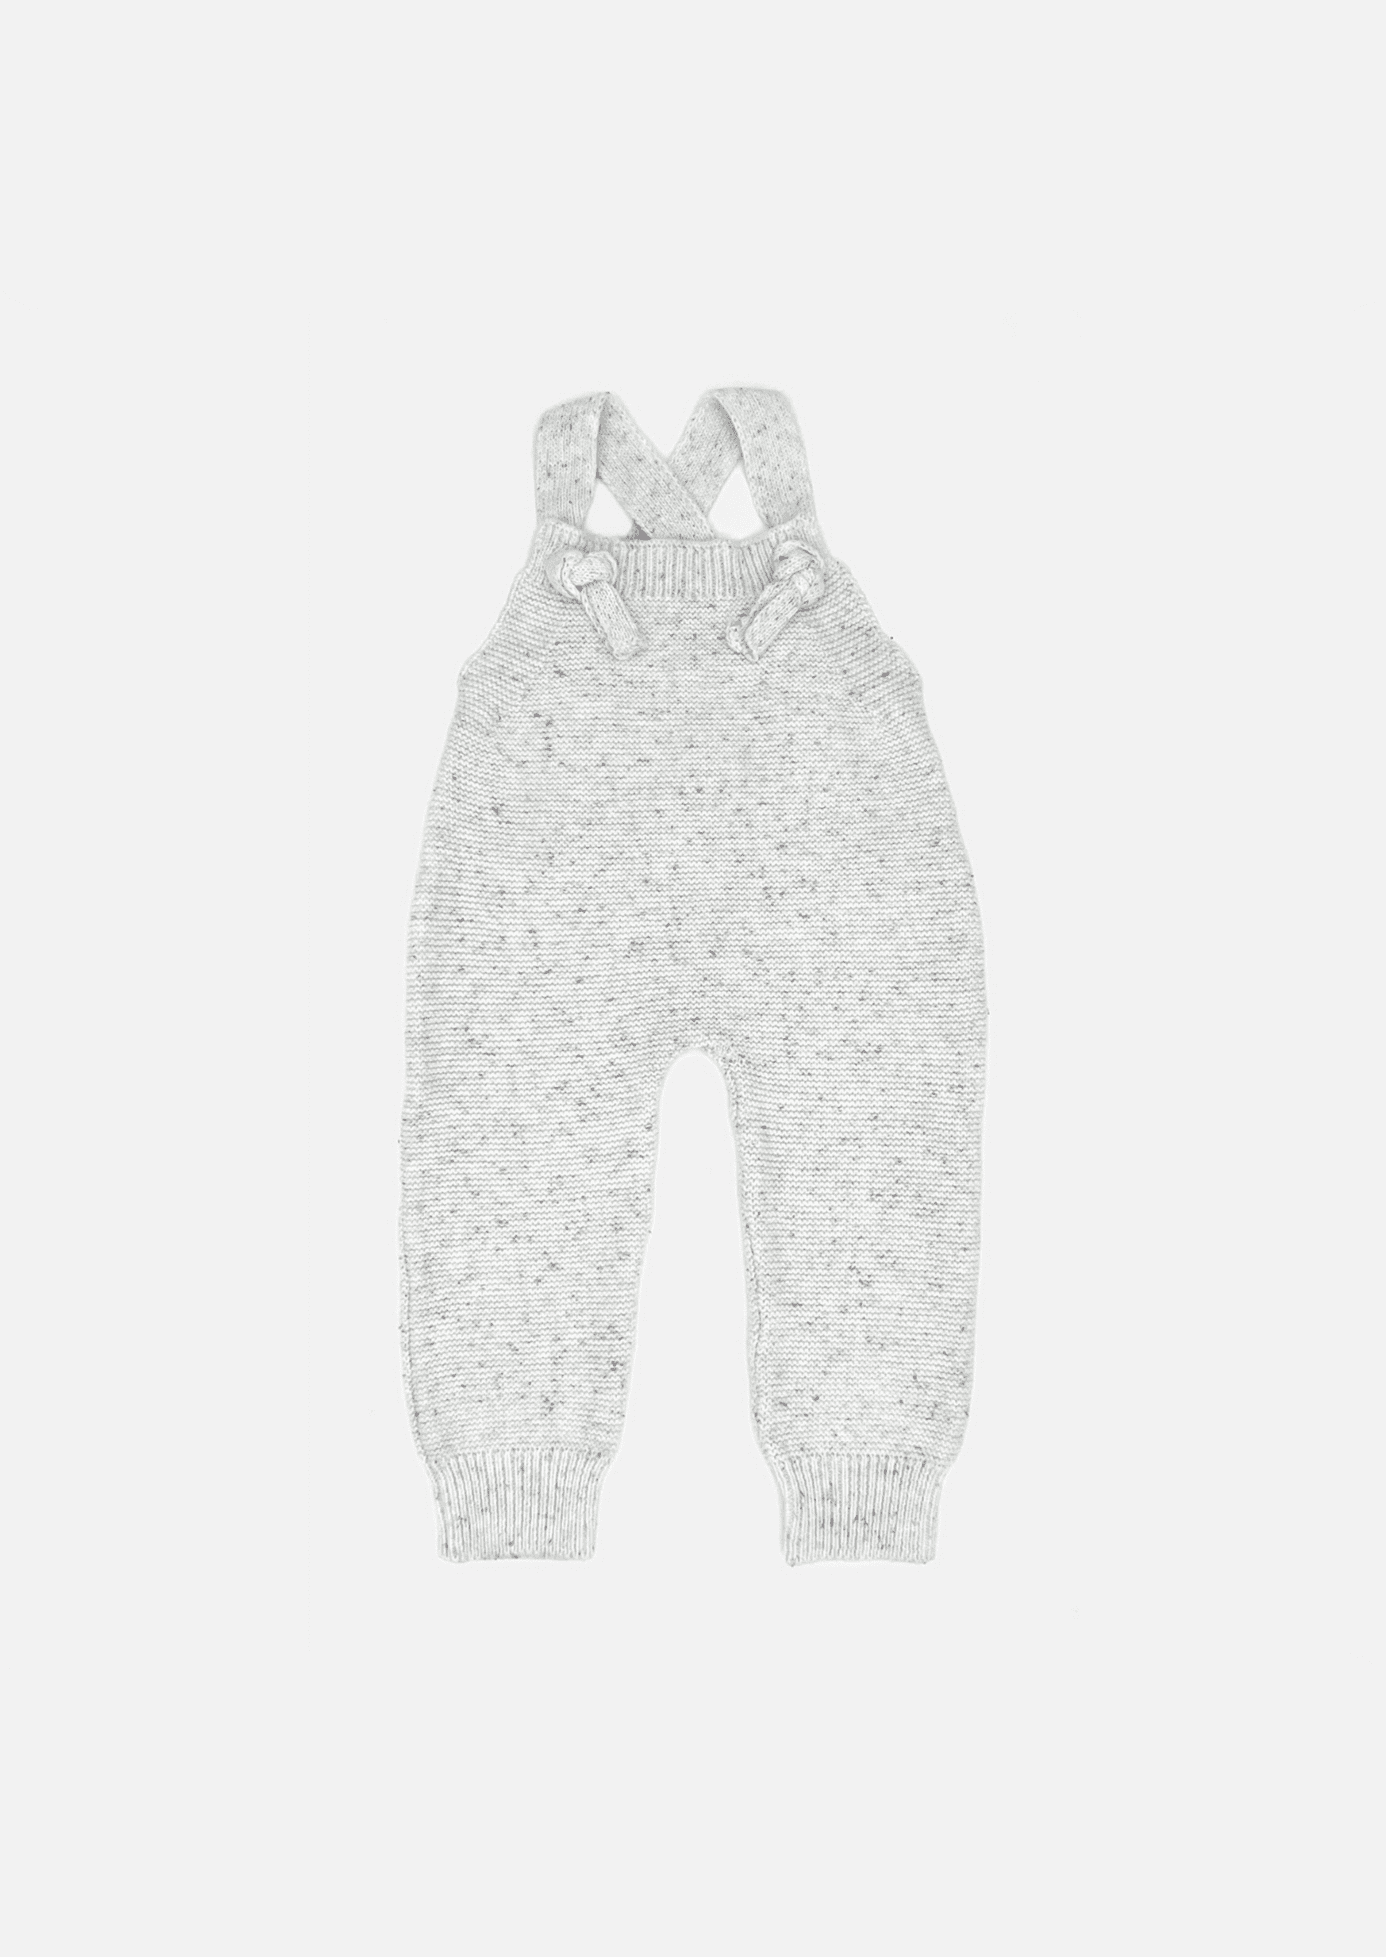 Purl Knit Overalls | Frosted Sprinkles - Mila & Co.